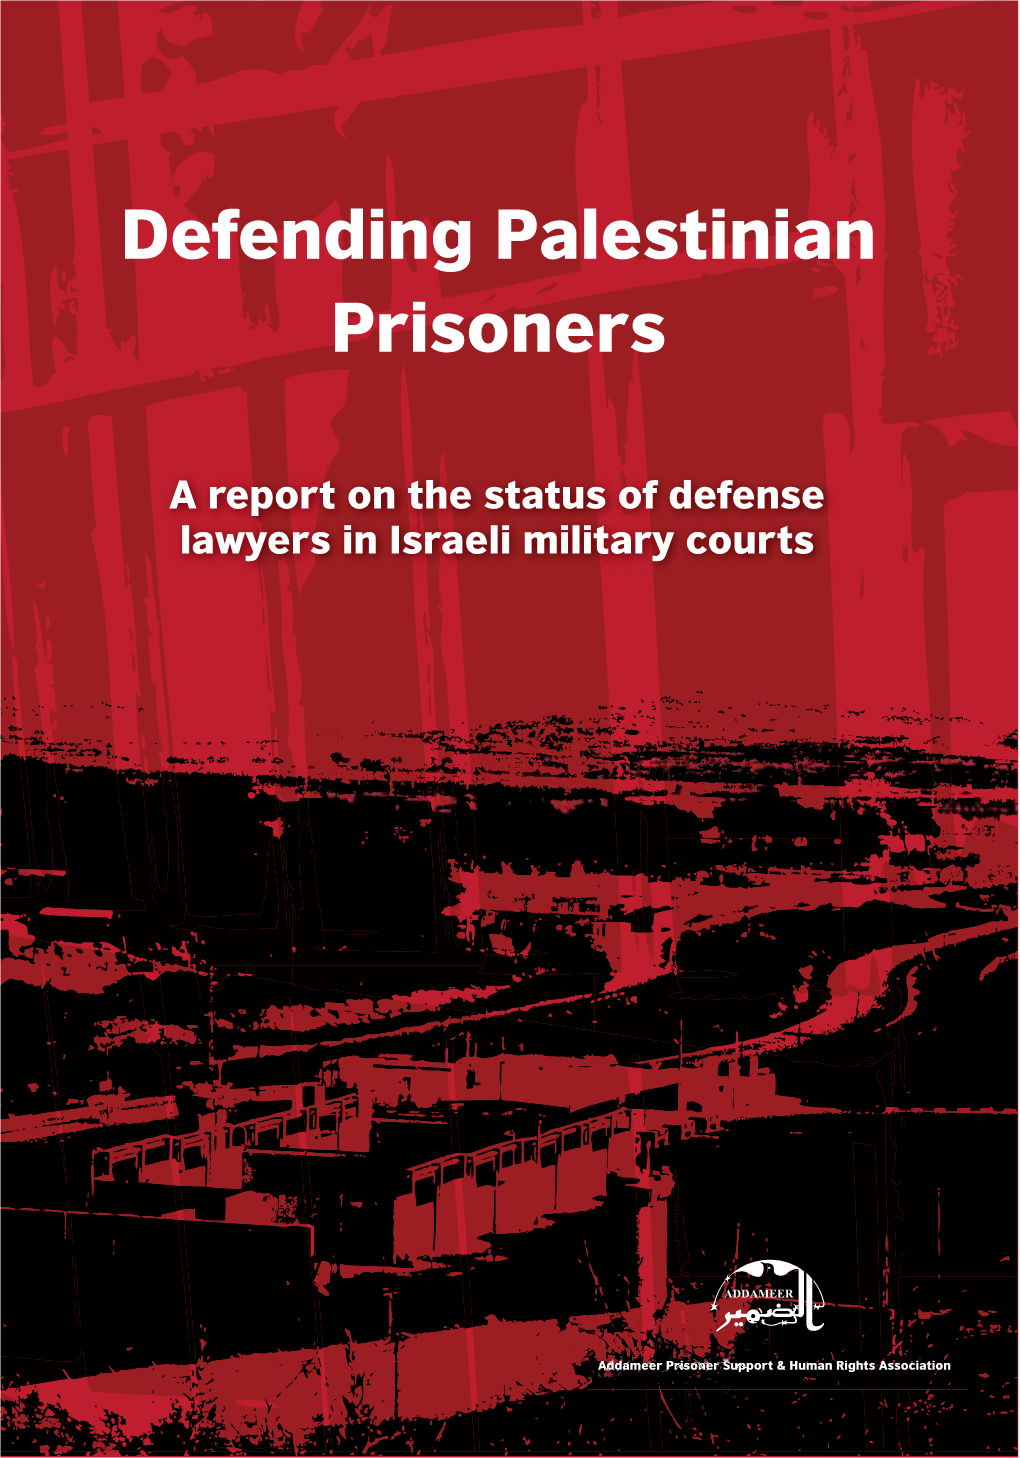 Defending Palestinian Prisoners: a Report on the Status of Defense Lawyers in Israeli Military Courts